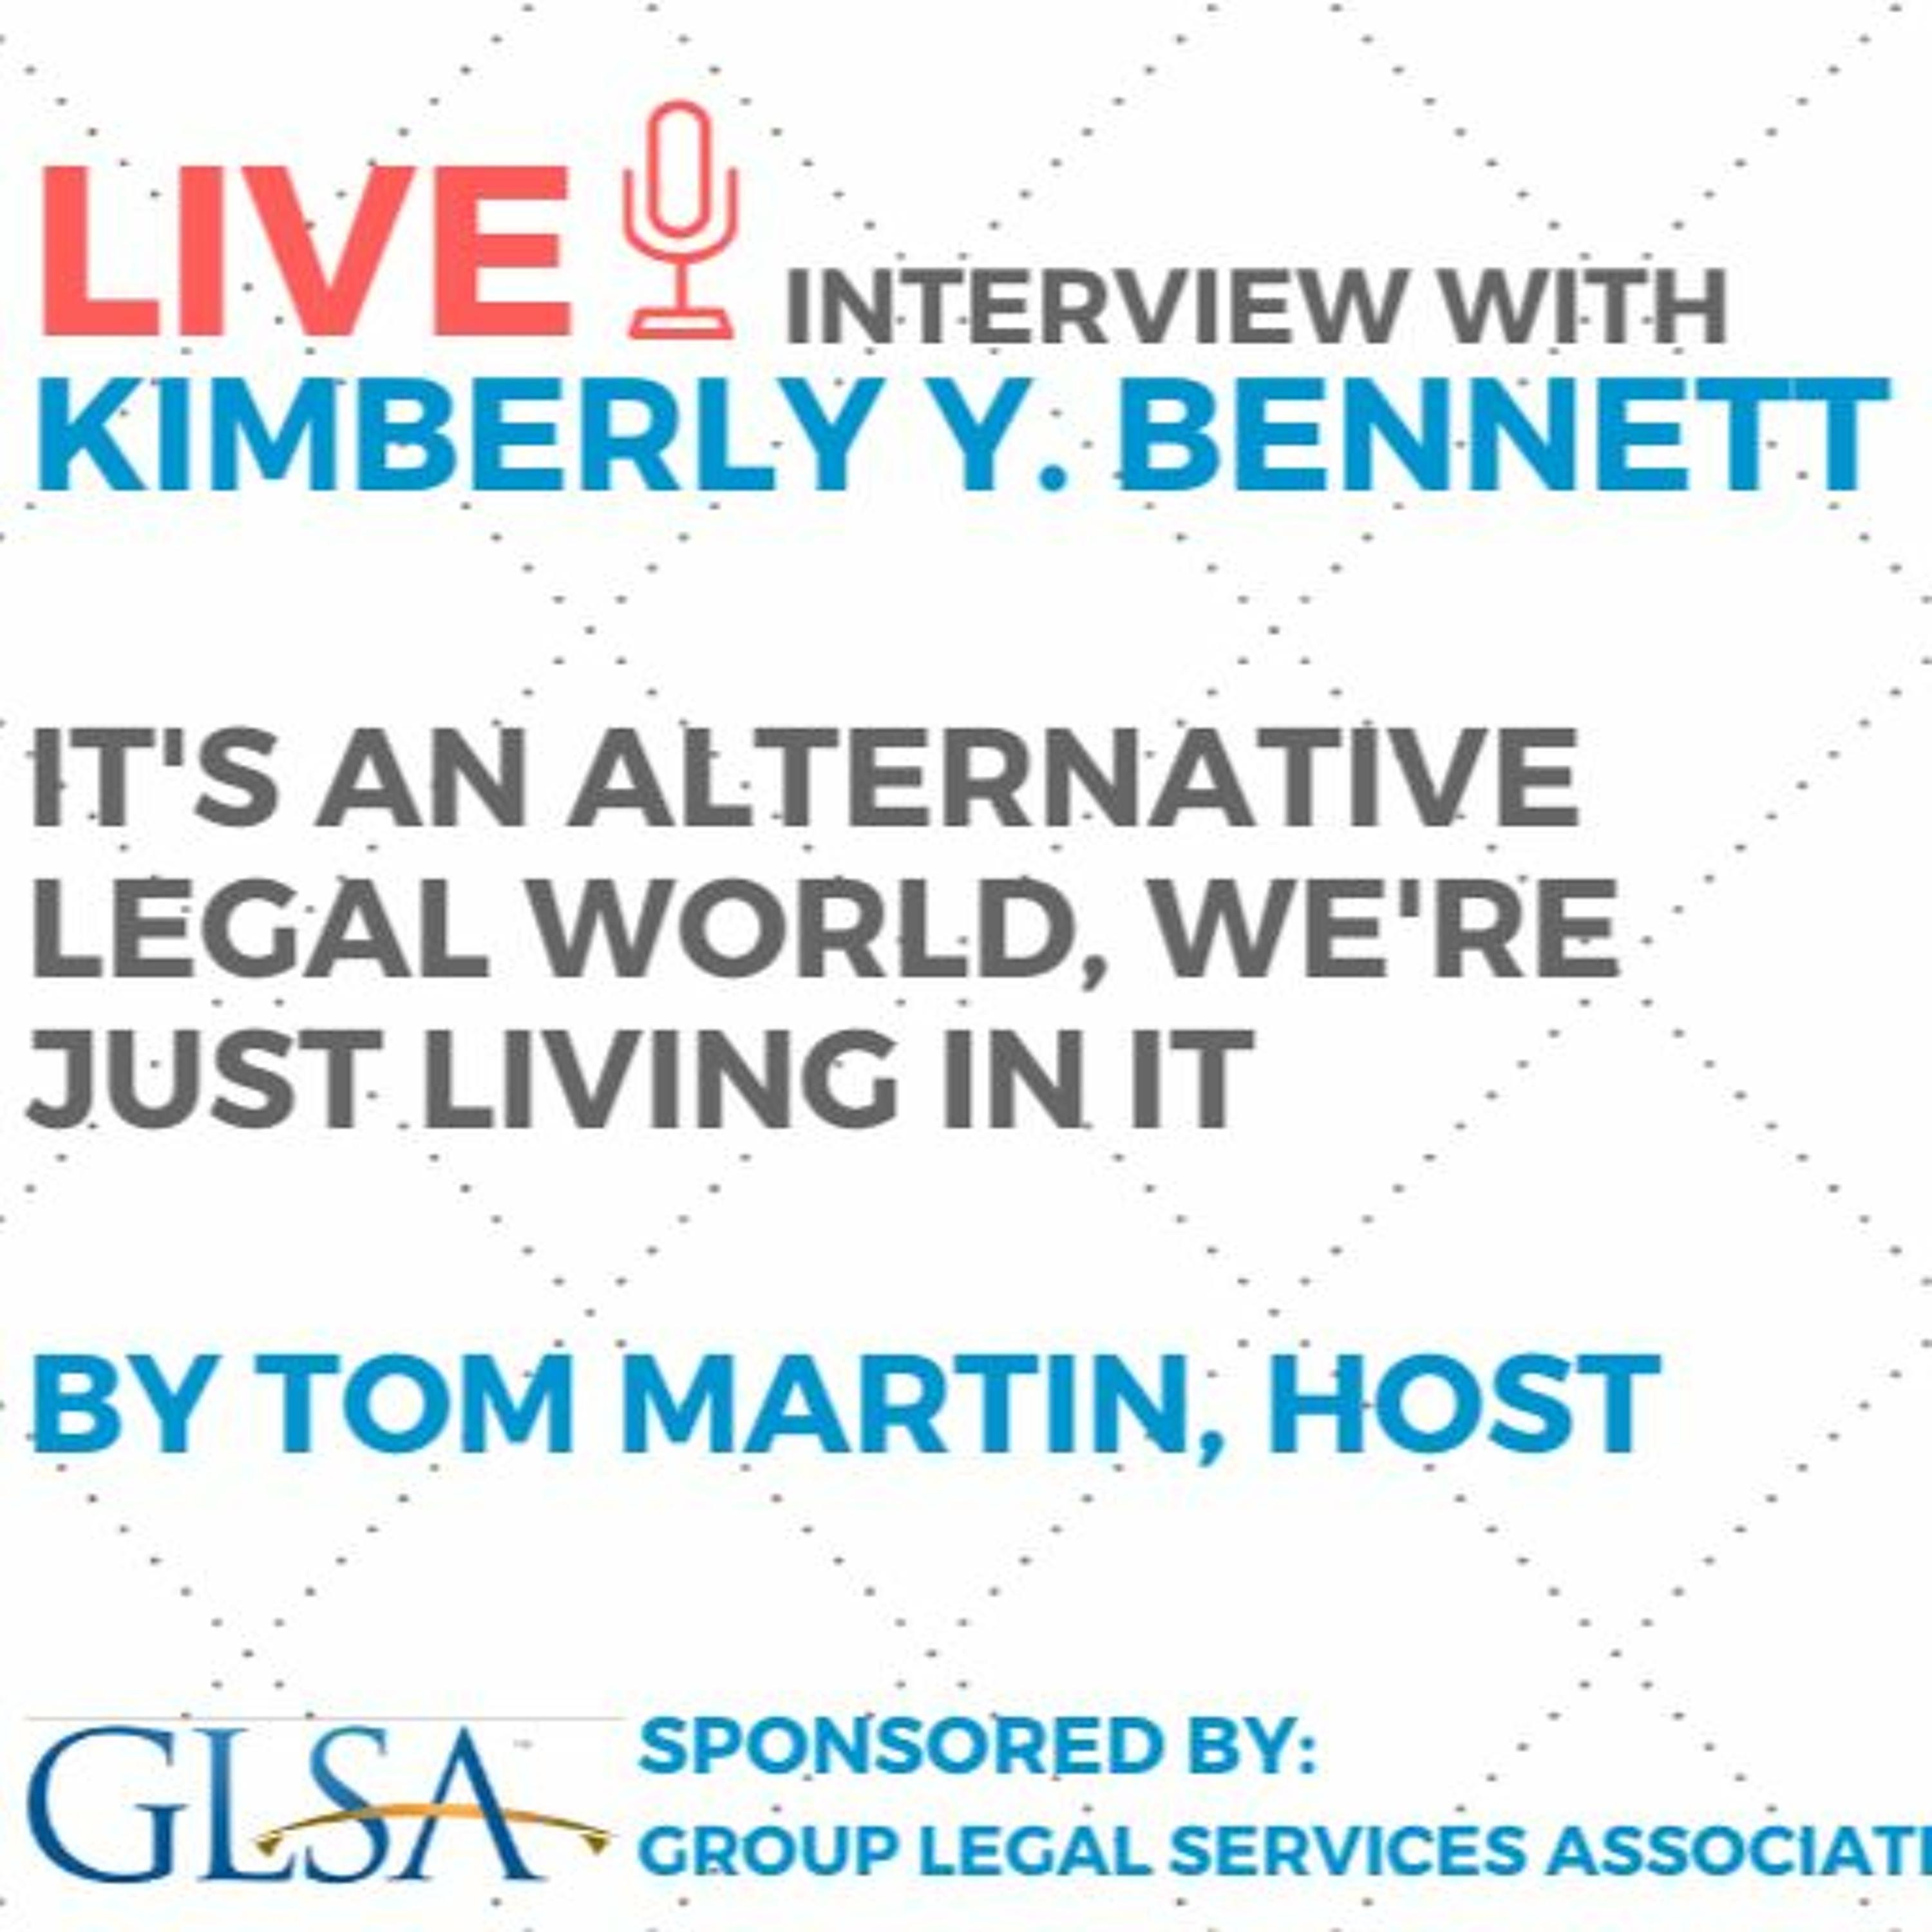 It’s an Alternative Legal World, We’re Just Living In It with Kimberly Y. Bennett